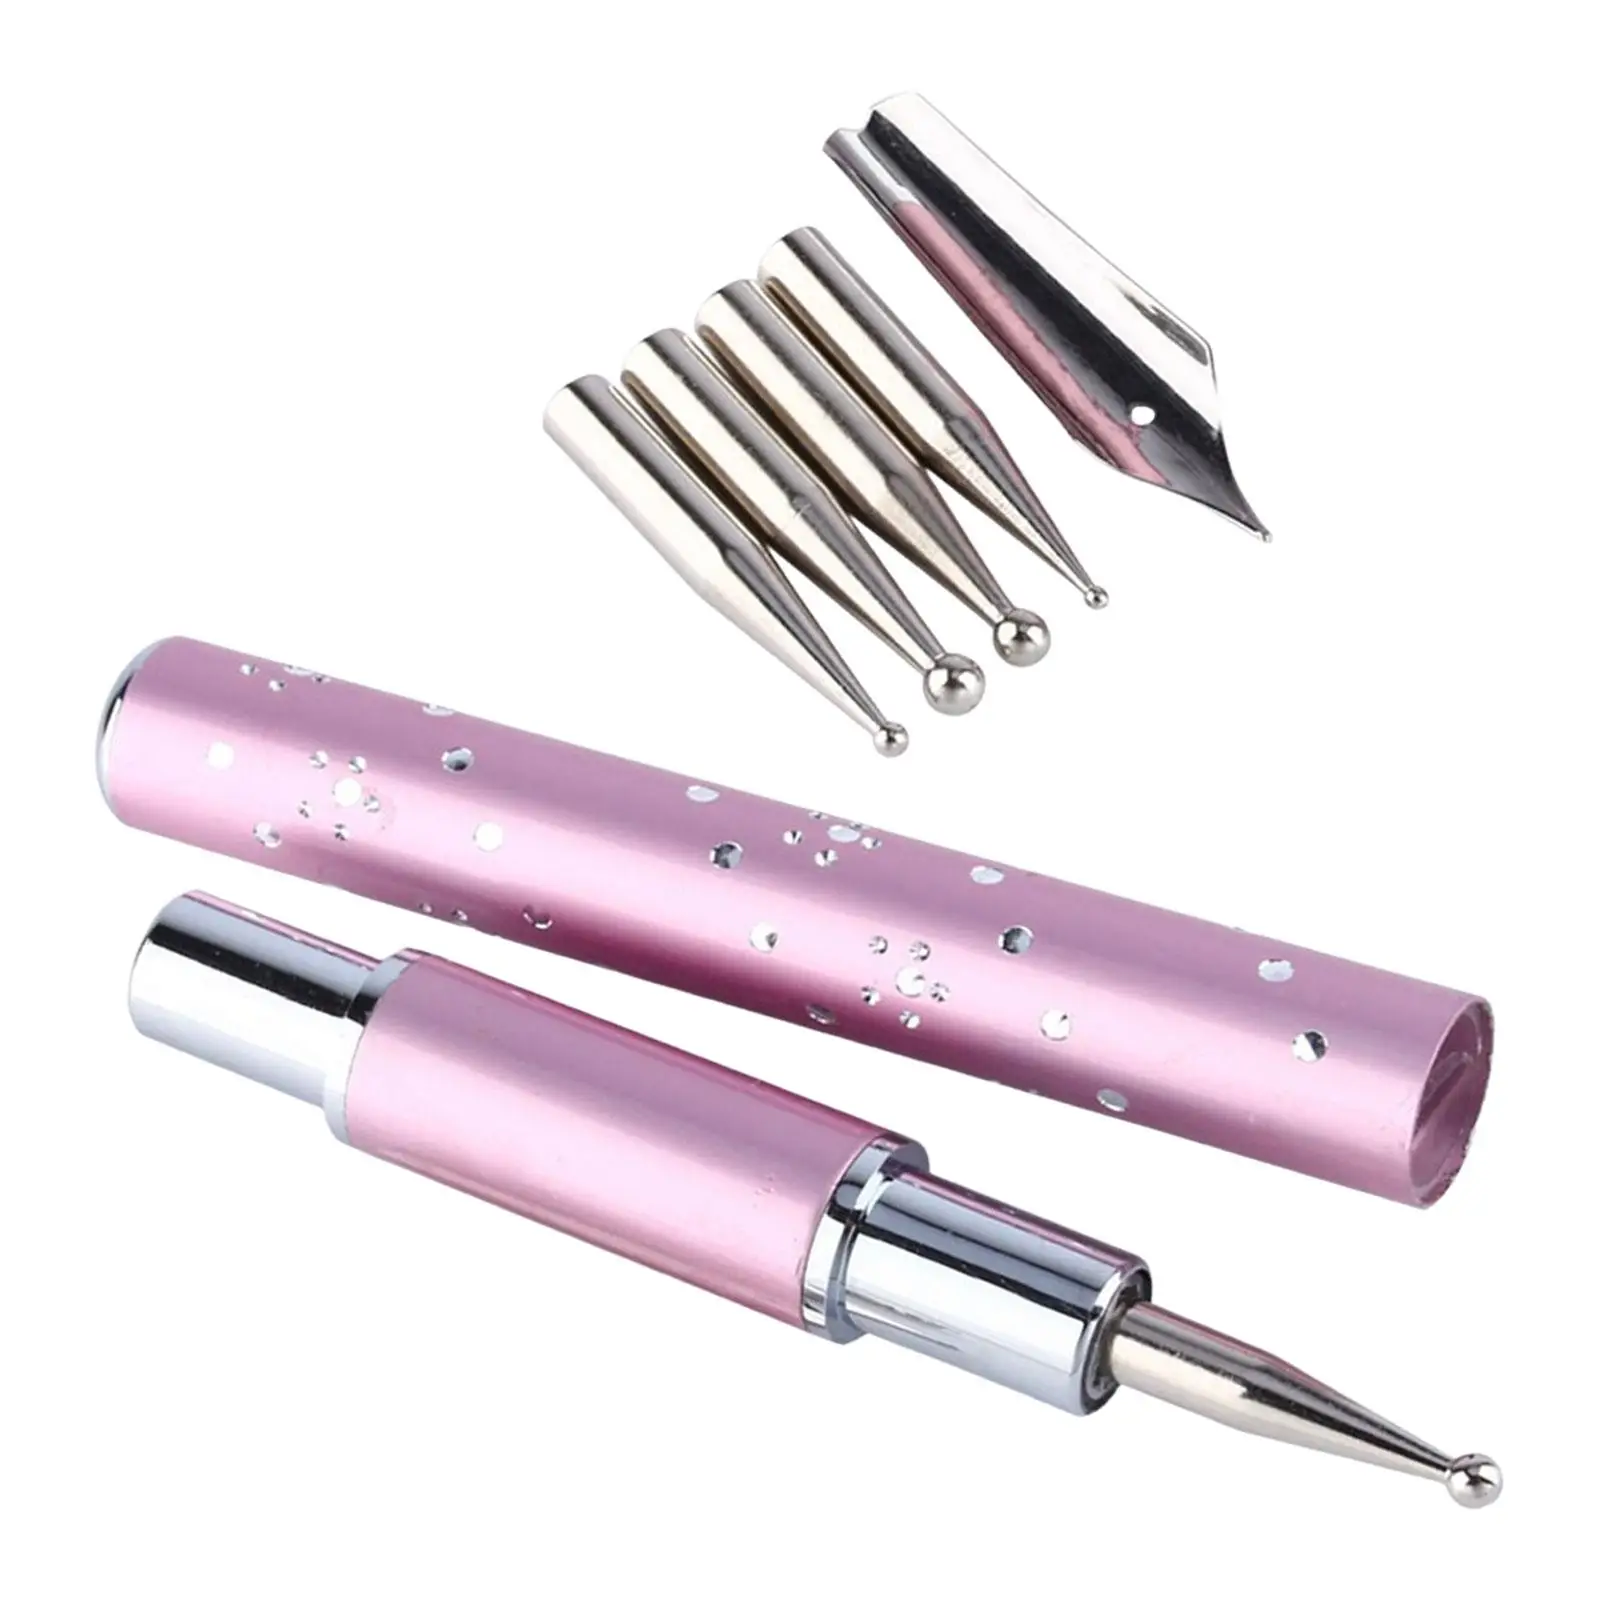 Nail Art Fountain Pen Brush Nail Art Painting Pen with 5 Replacement Heads DIY Manicure Tool Dotting Liner Tool